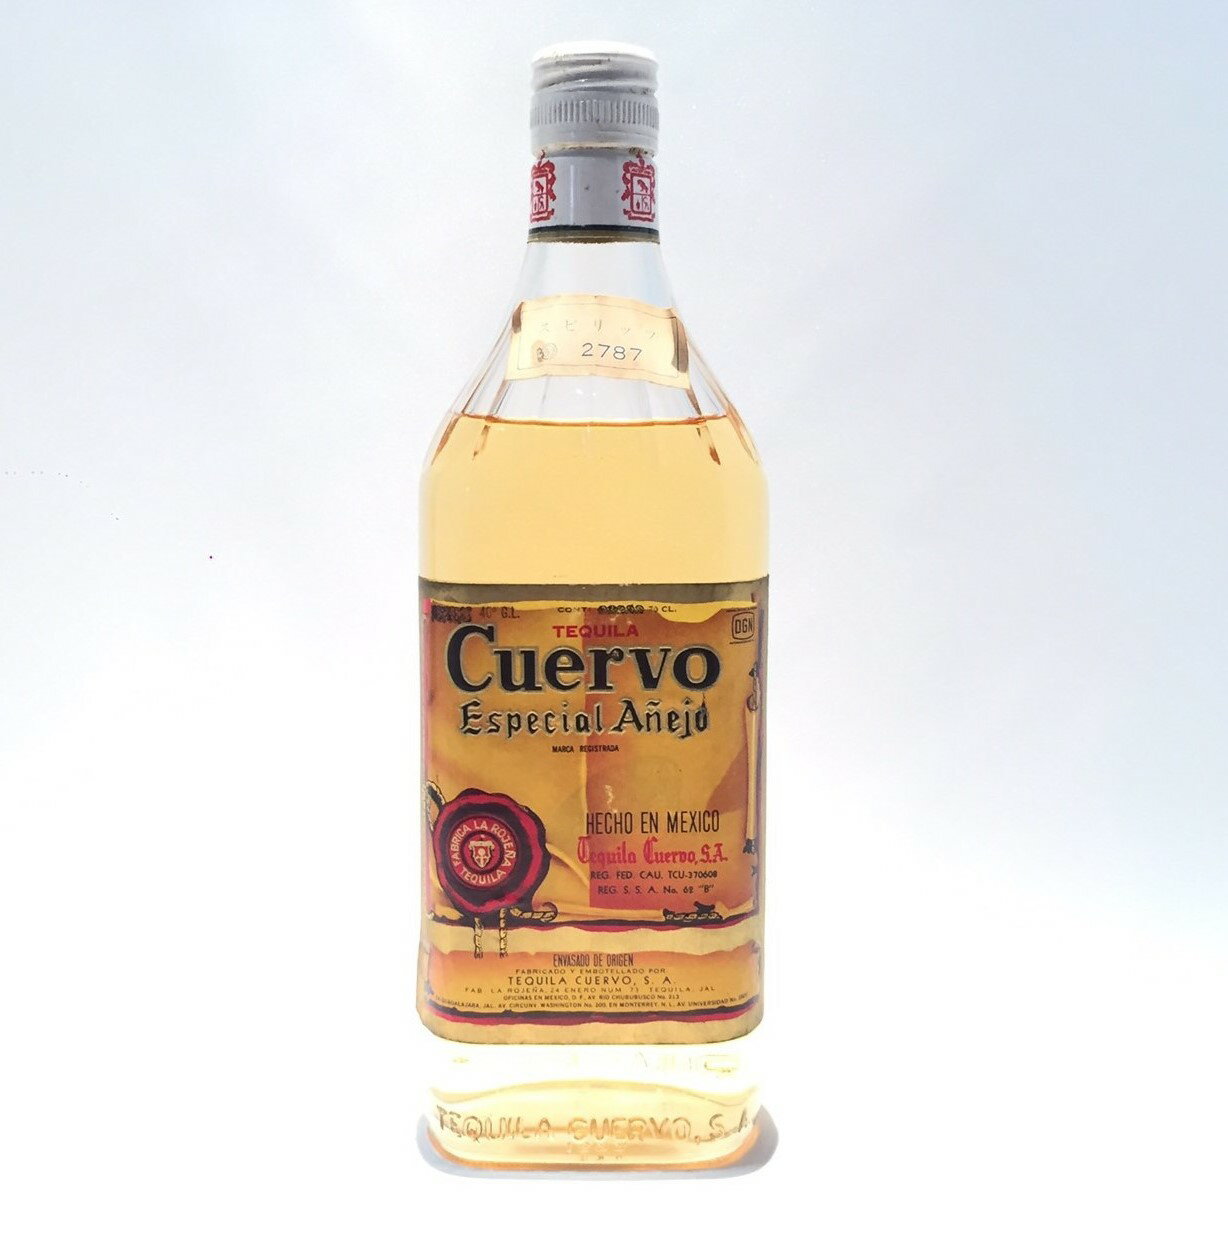 eL[ NG{GXyV AlzTEQUILA CUERVOESPECIAL ANEJO700ml^40x